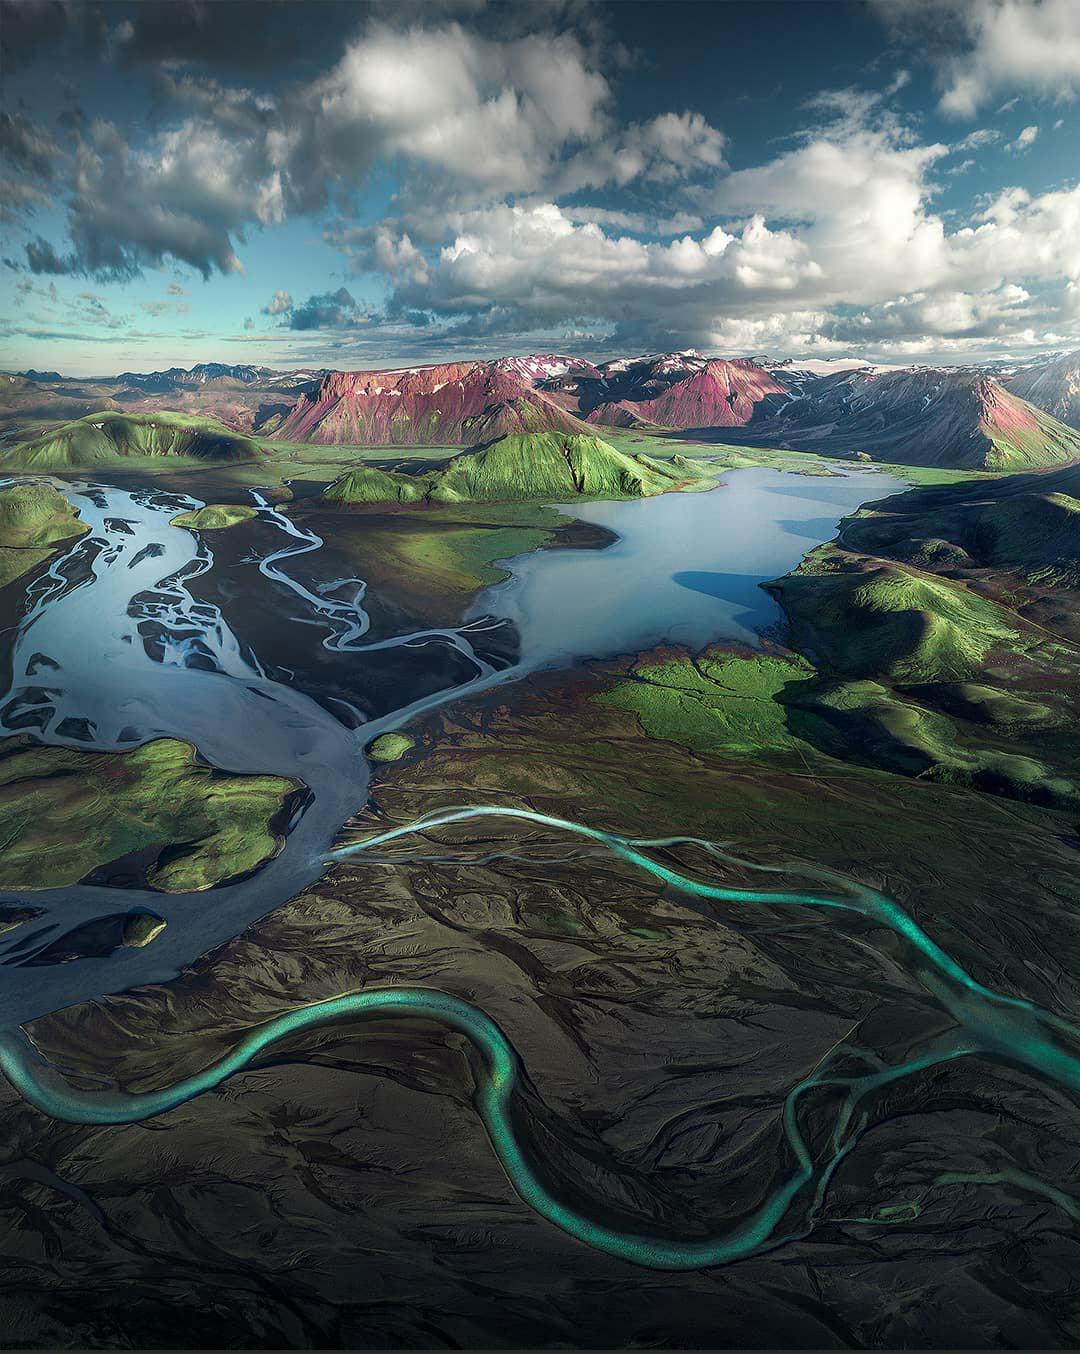 The Highlands of Iceland, it looks unreal. Pure beauty.